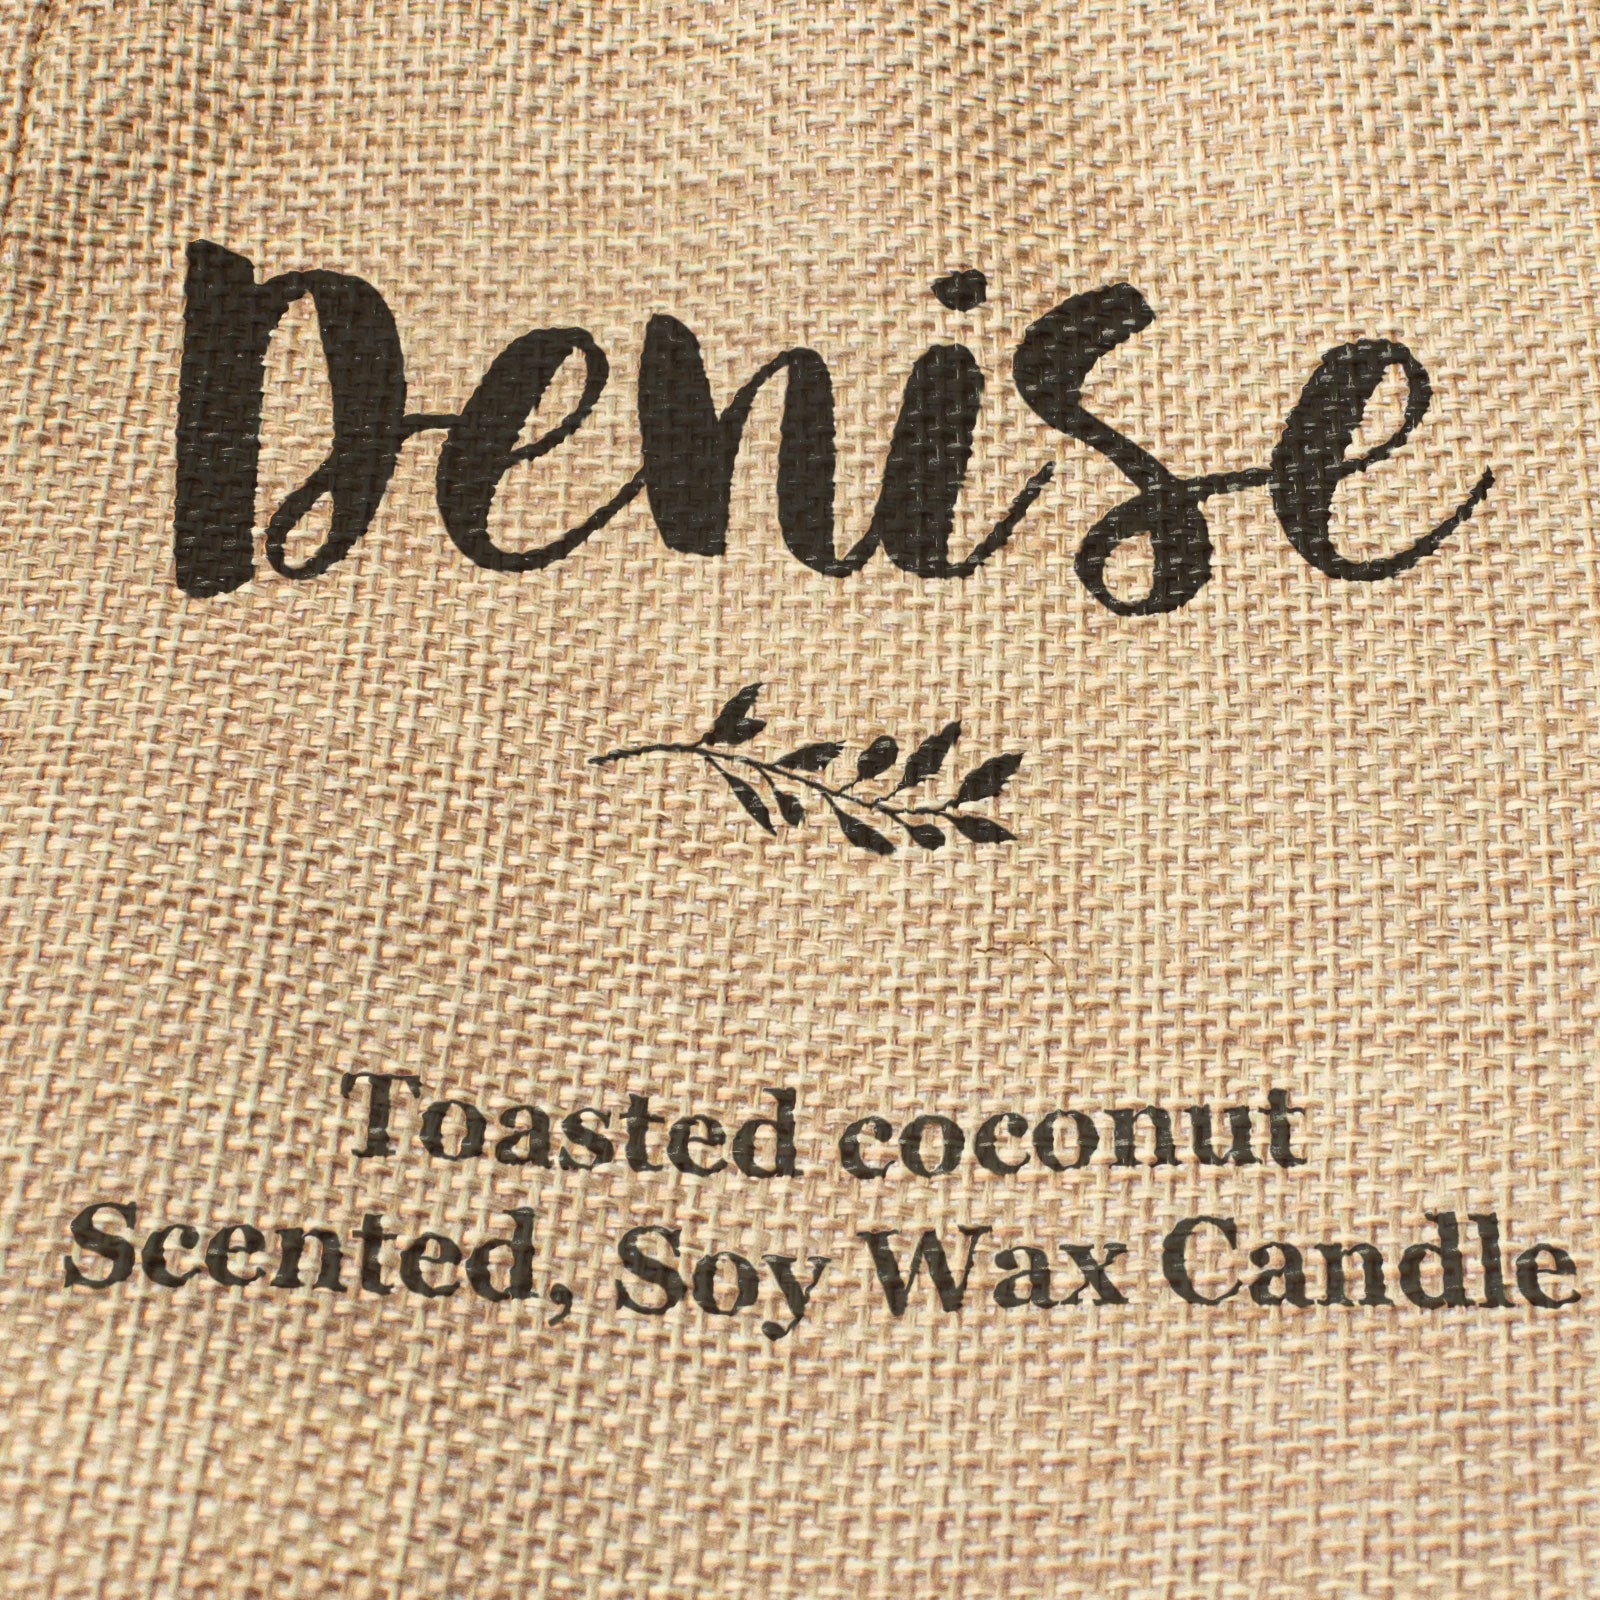 DENISE - Toasted Coconut Bowl Candle – Soy Wax - Gift Present